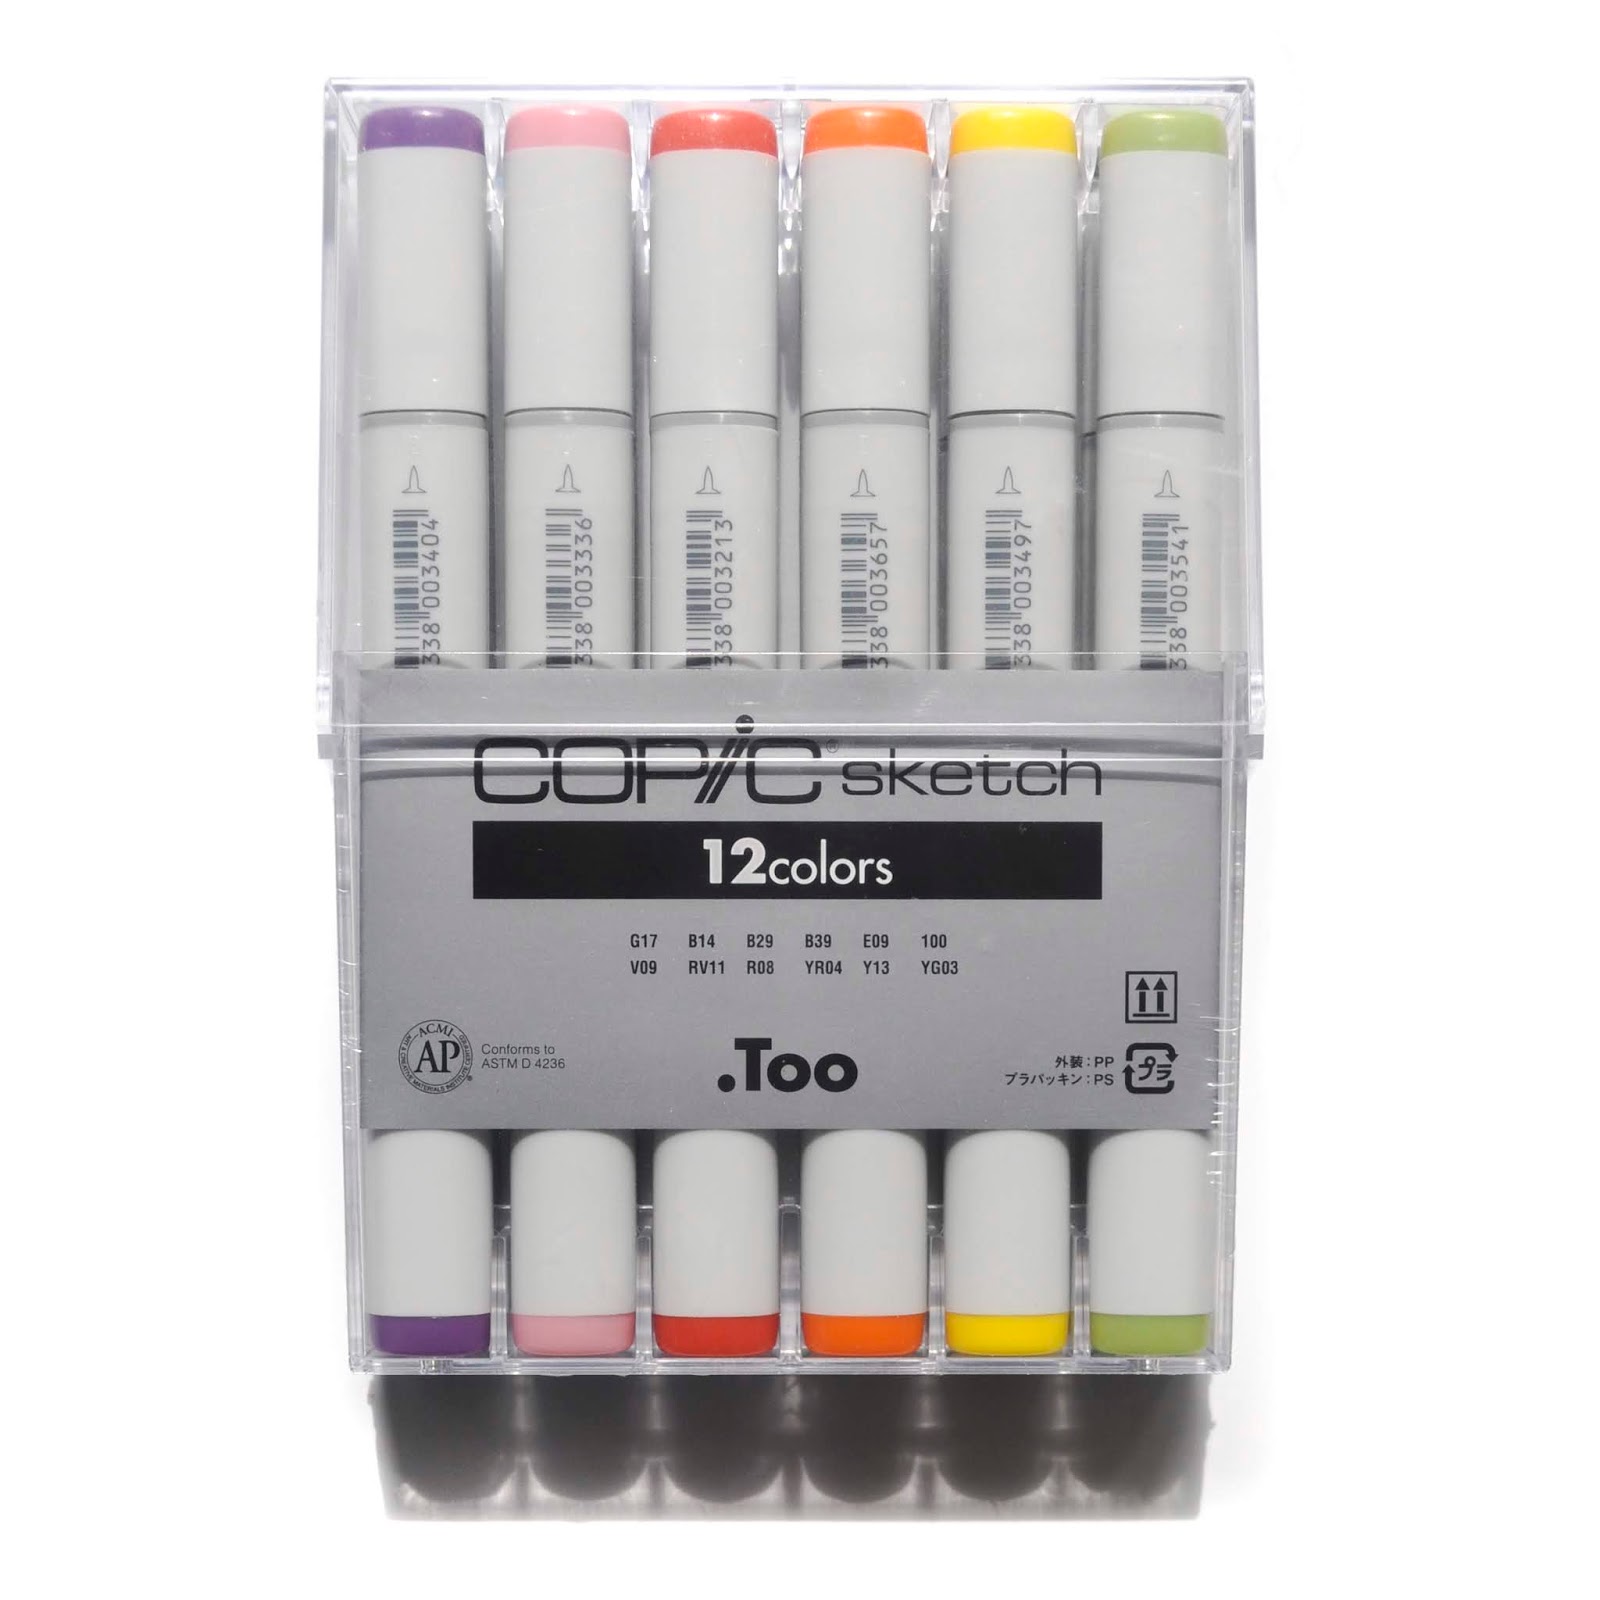 My Copic Marker Collection! : r/copic